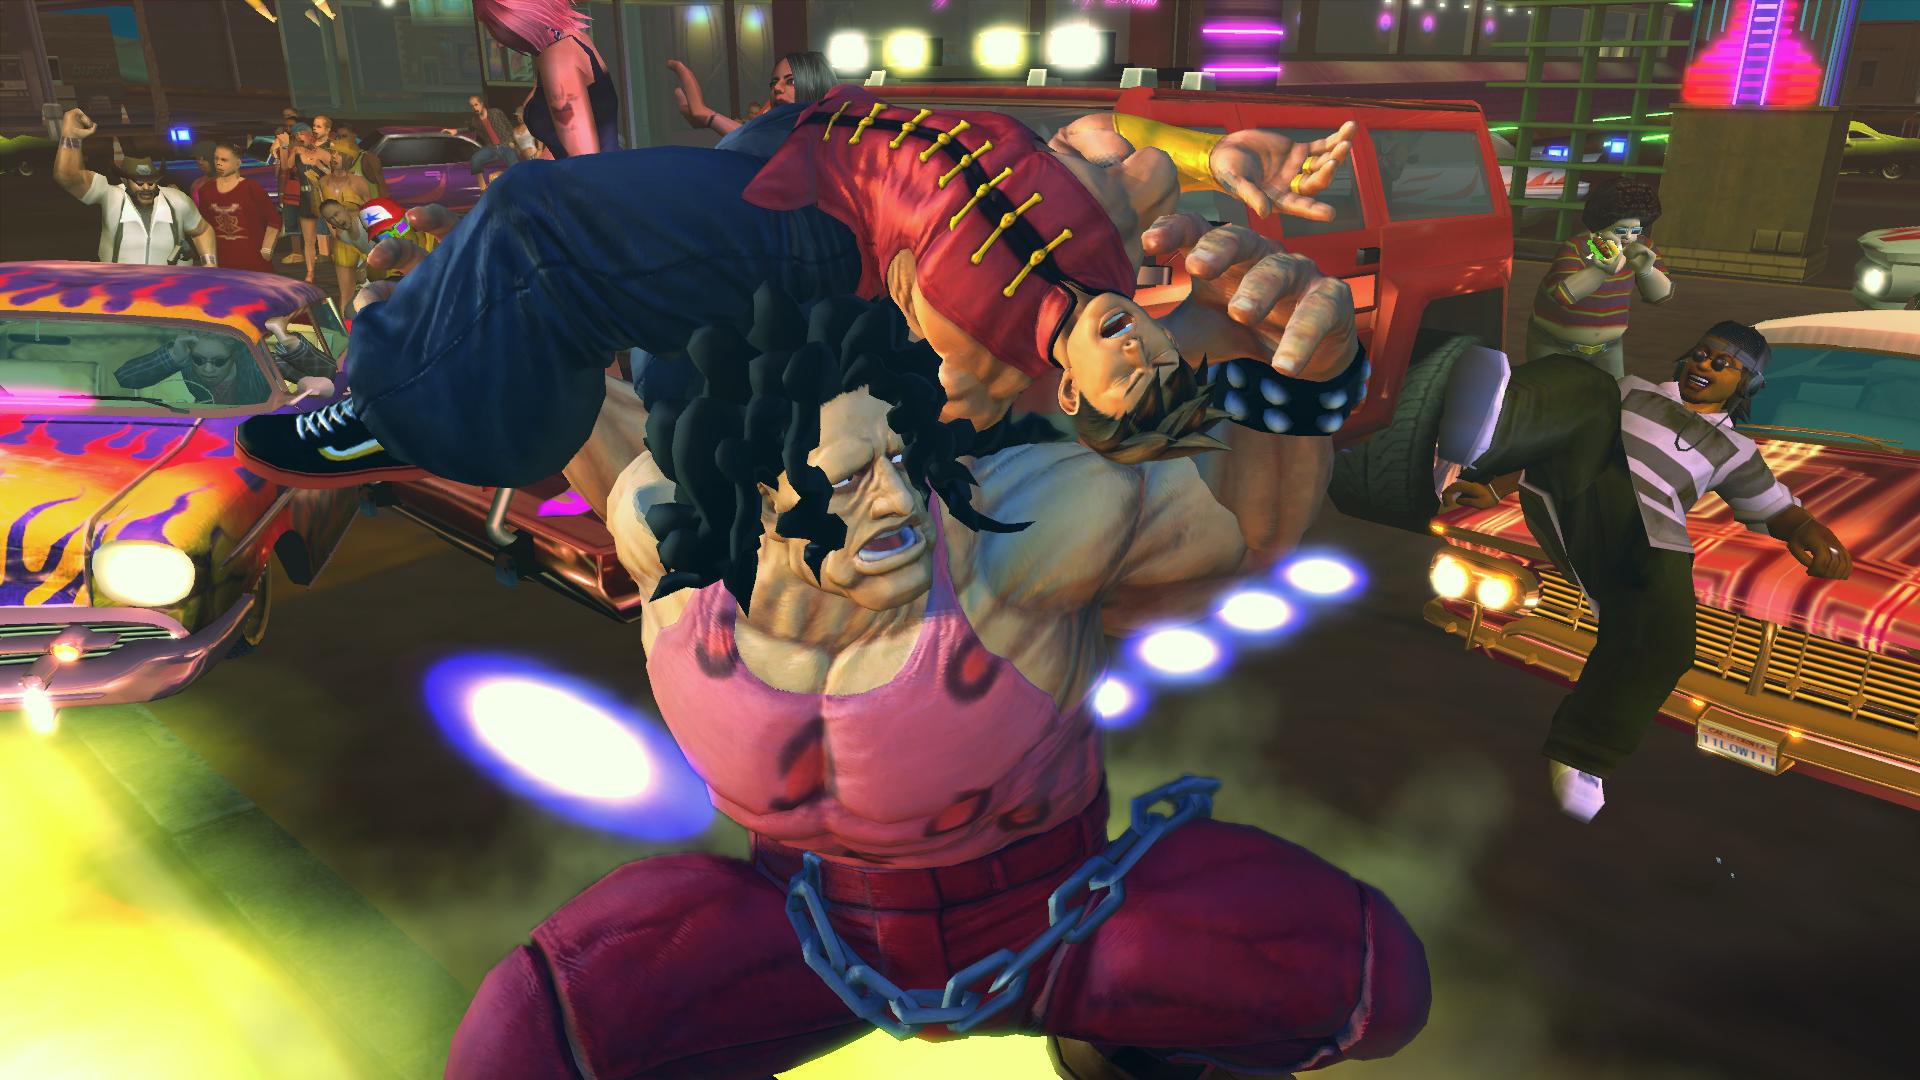 Ultra Street Fighter IV System Requirements - Can I Run It